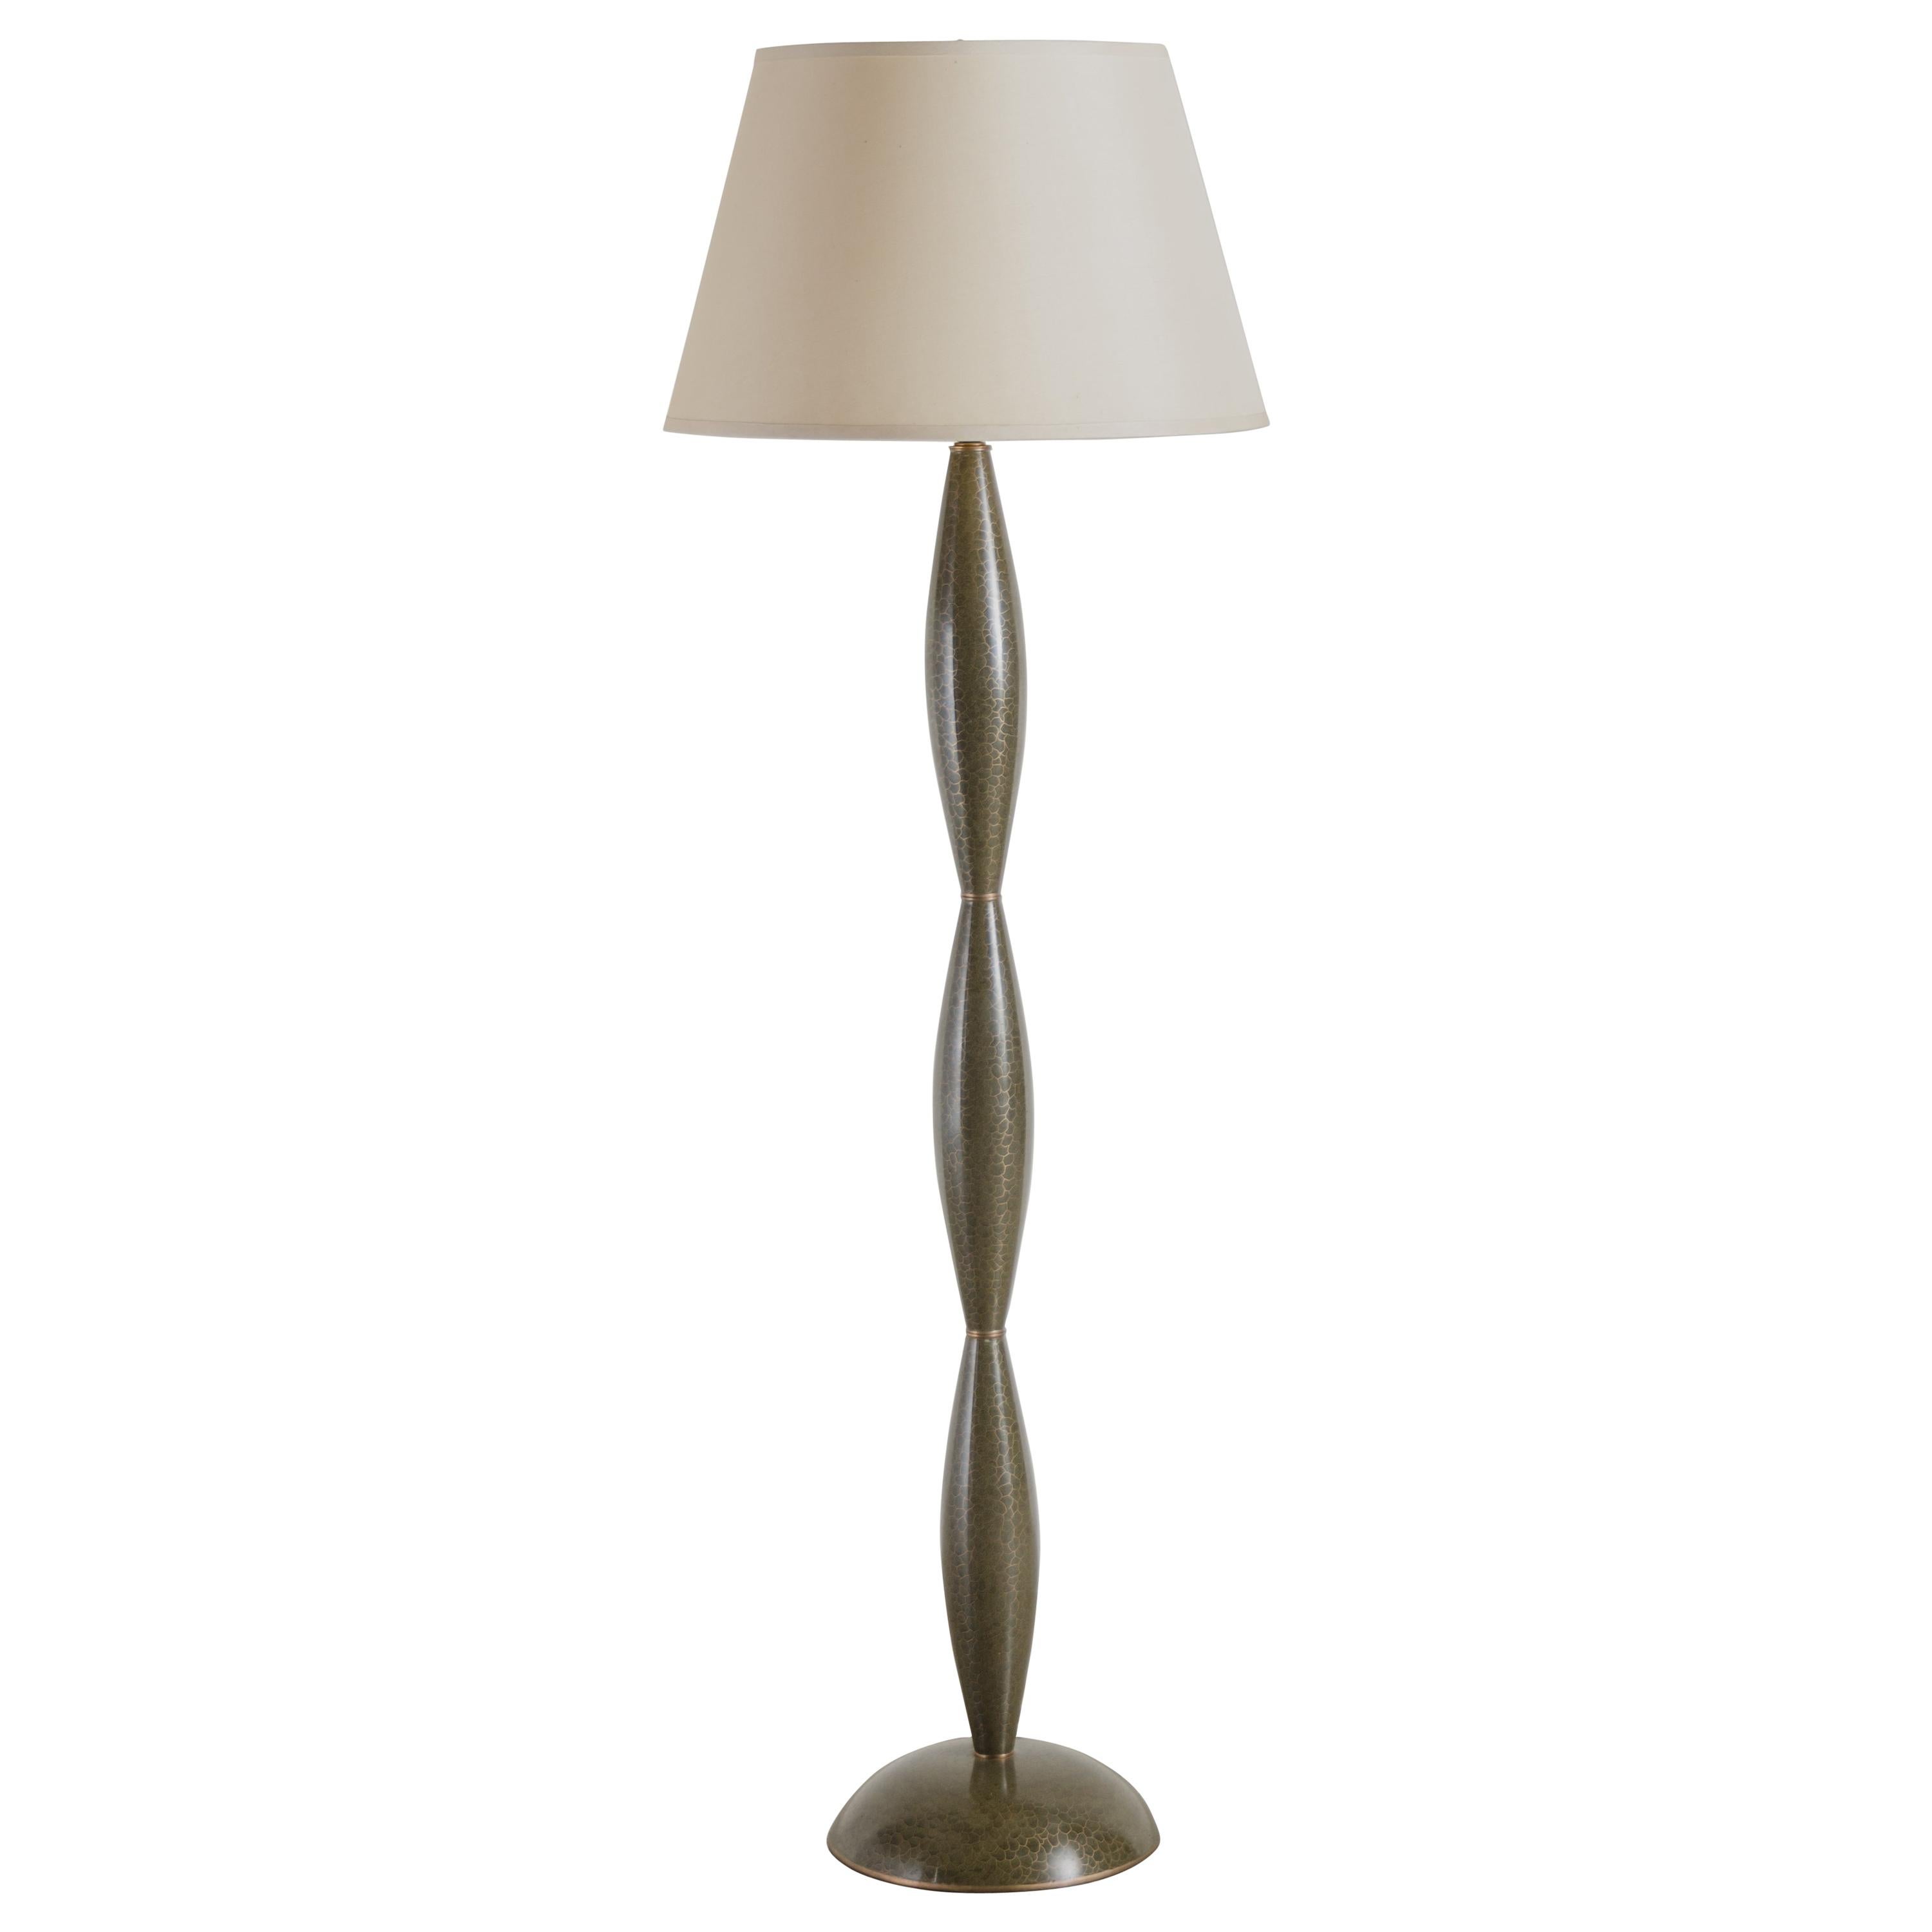 Baluster Floor Lamp, Moss/Webb Design Cloisonné by Robert Kuo, Limited Edition For Sale